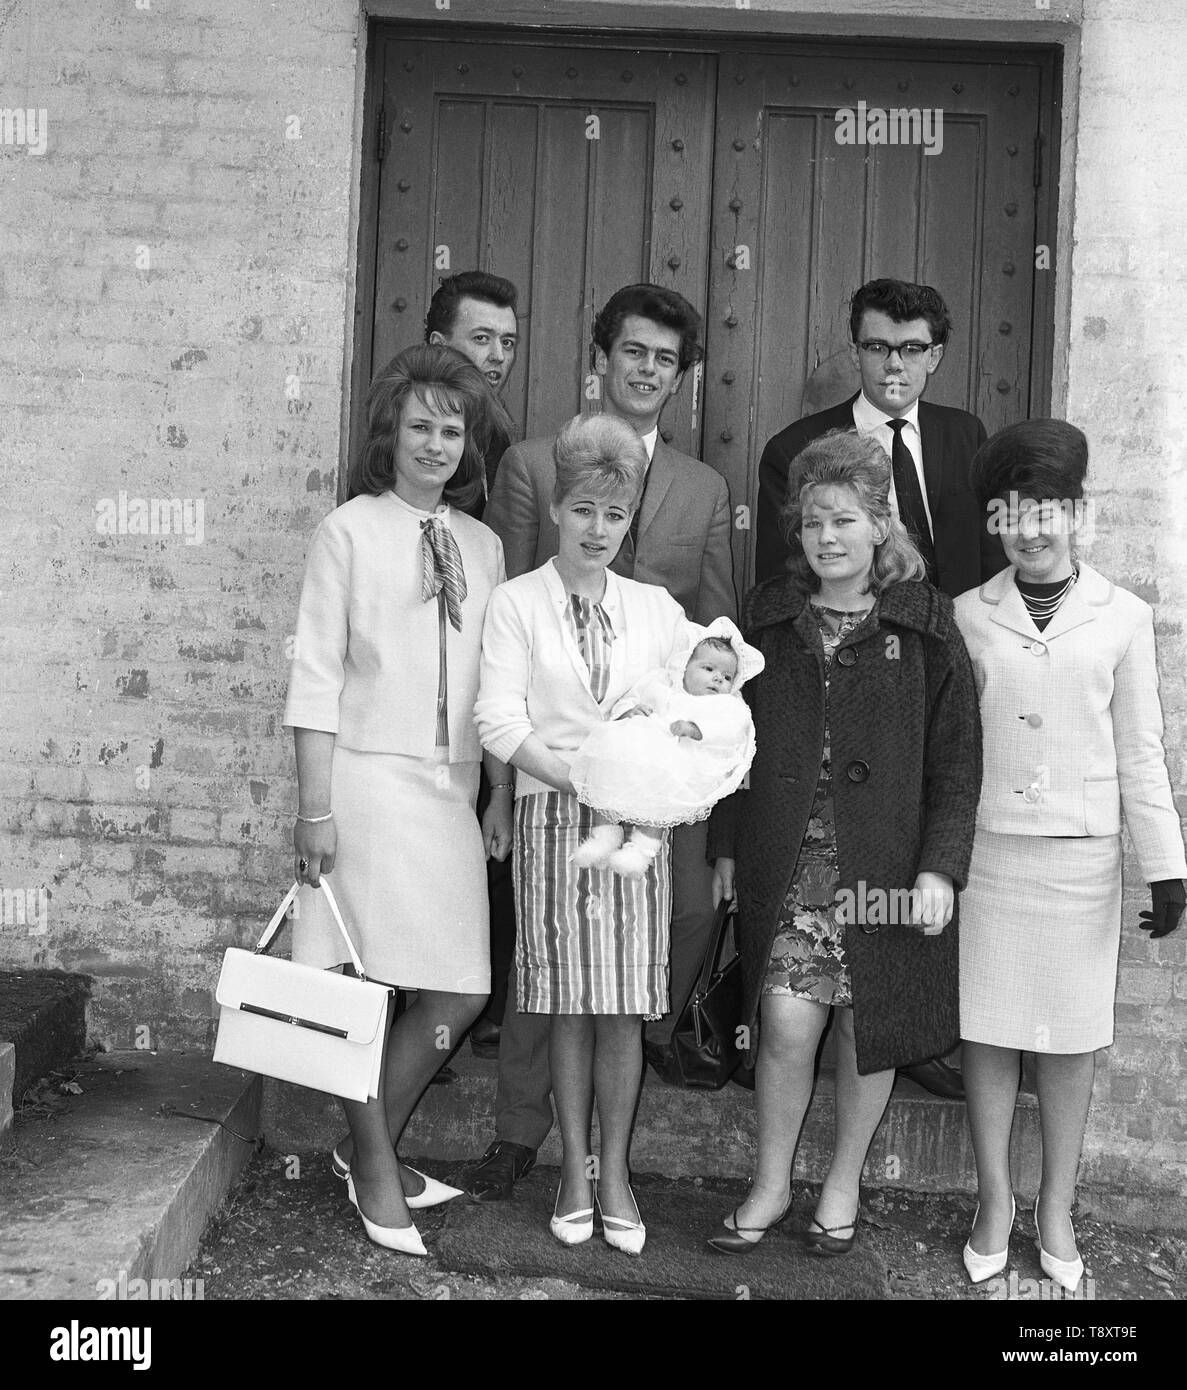 A Baby Christening in the UK c1962  Group shot of baby with parents and possibly with god parents  Photo by Tony Henshaw Stock Photo